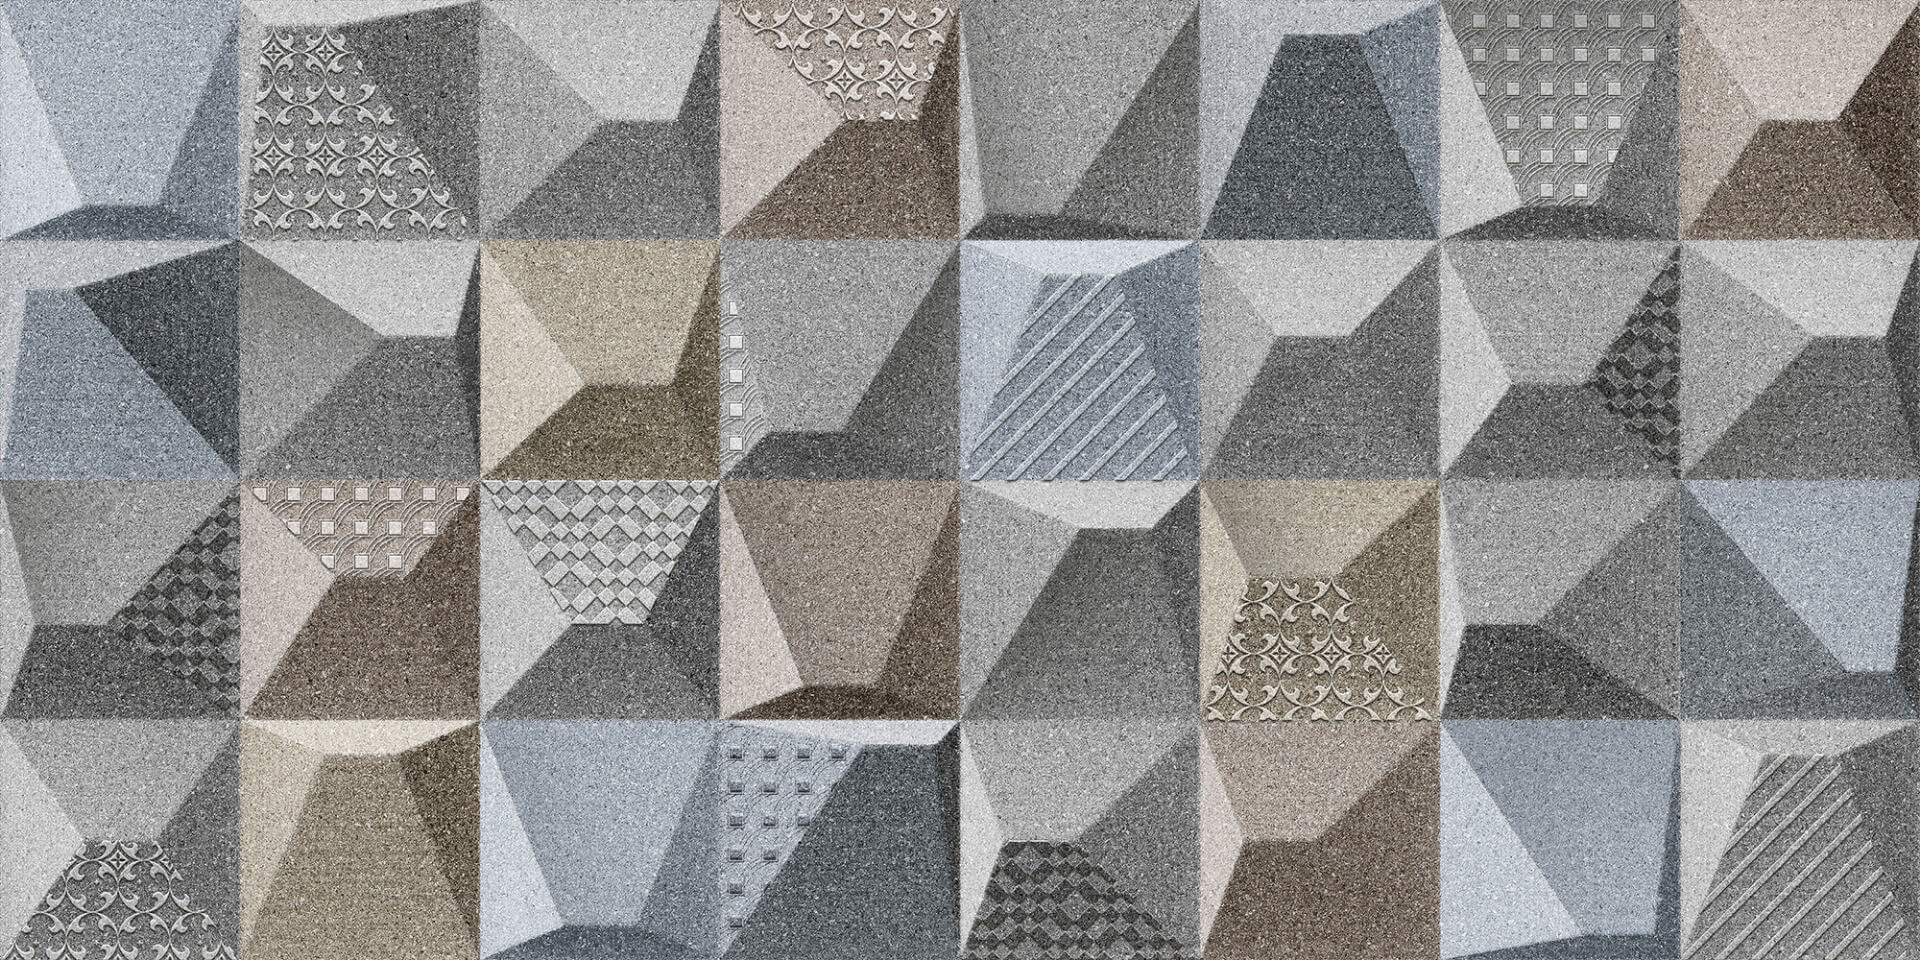 Abstract Tiles for Accent Tiles